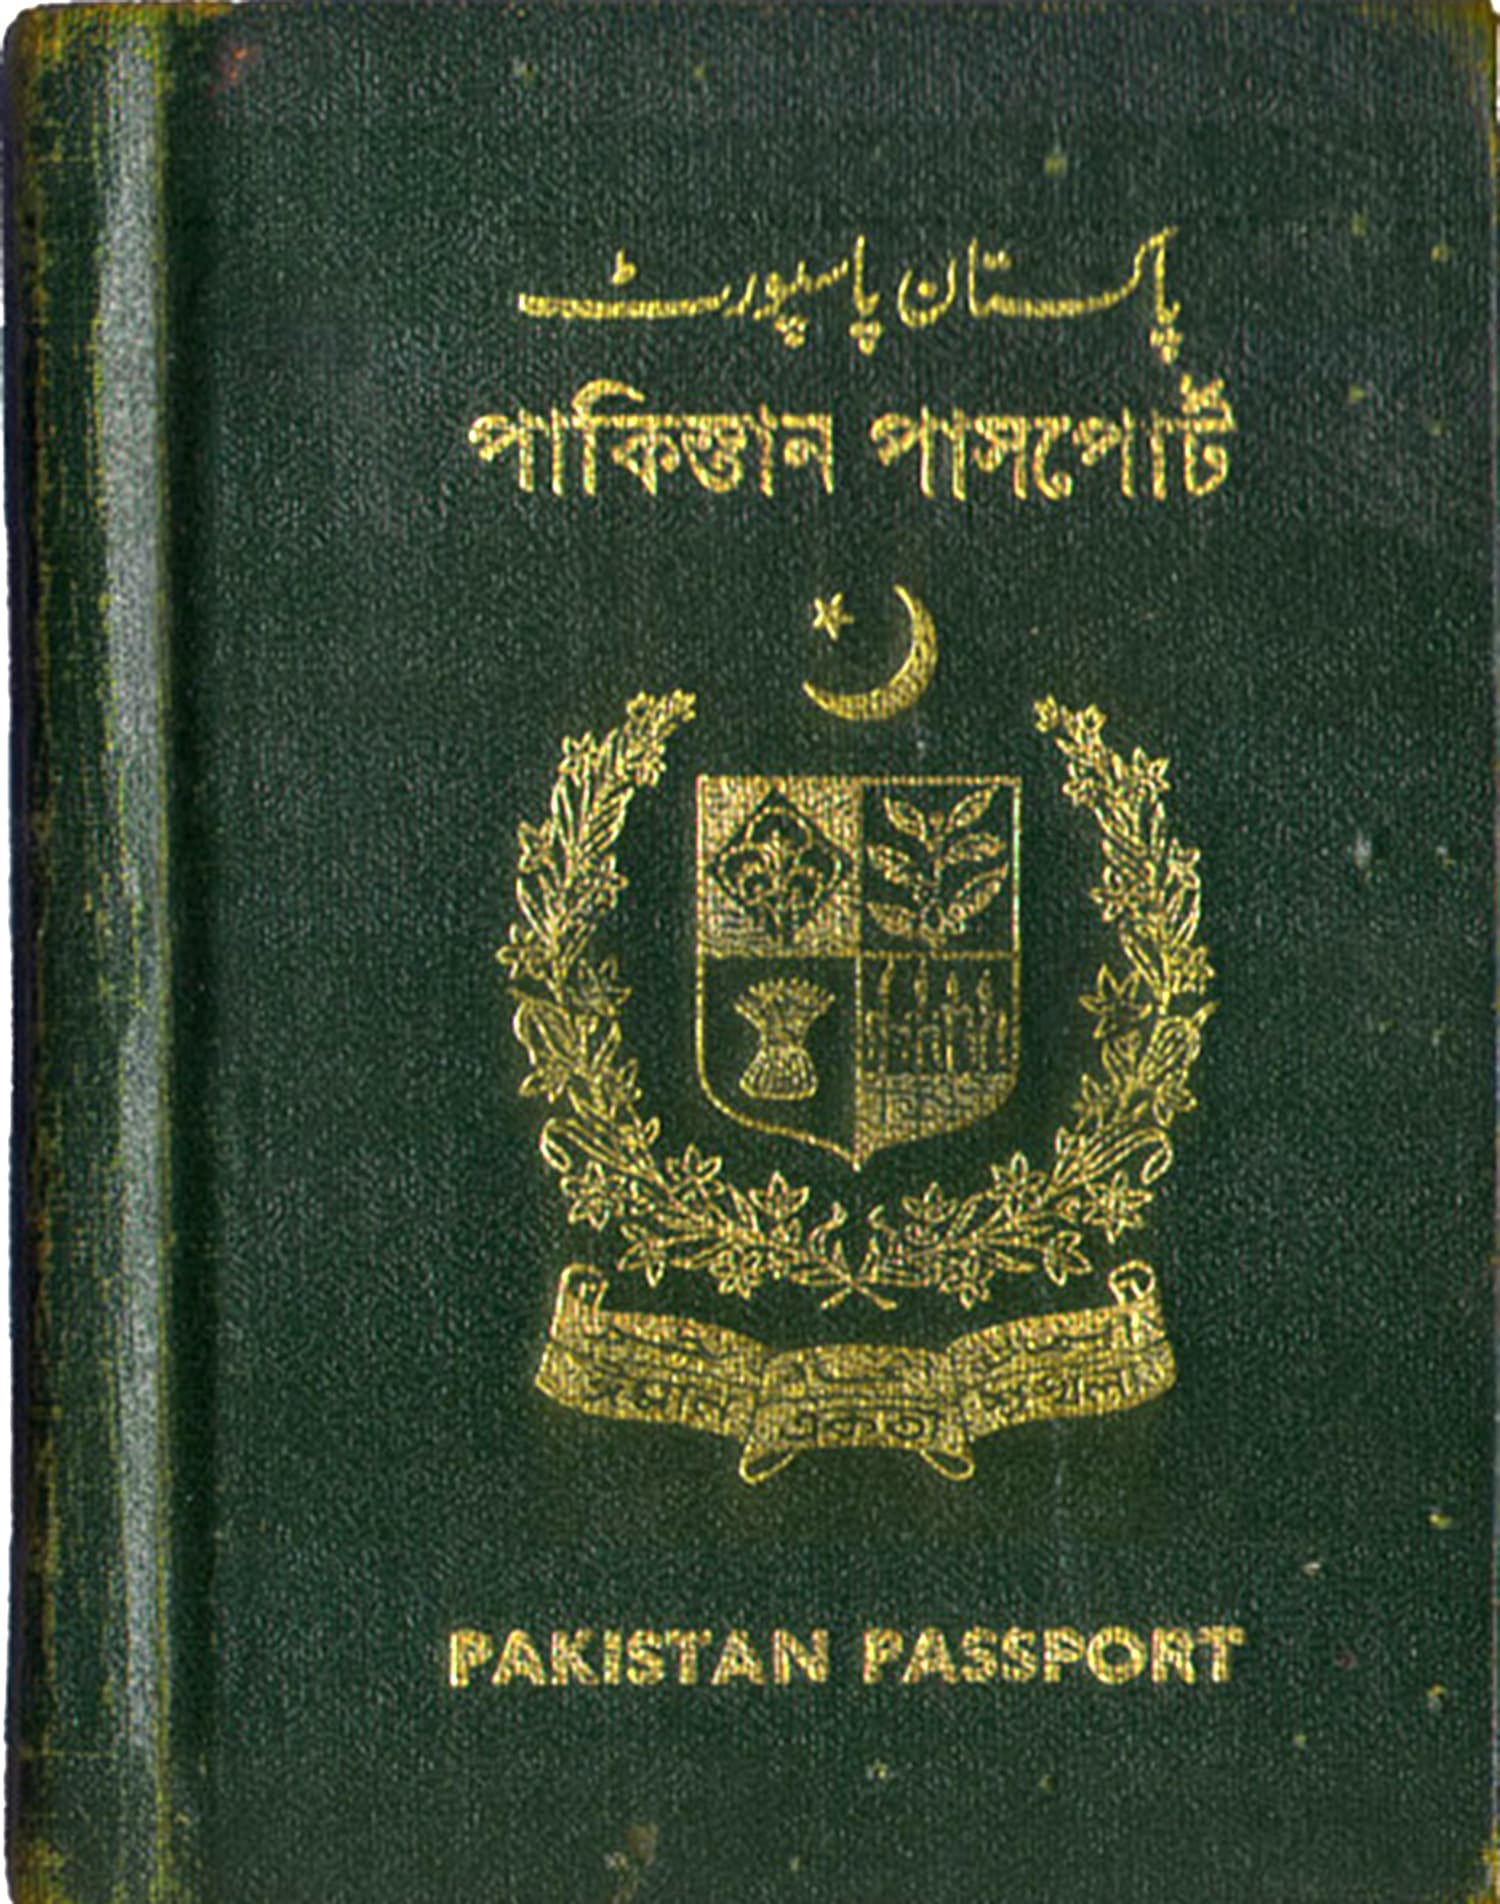 The Ayub regime had to issue new passports following criticism